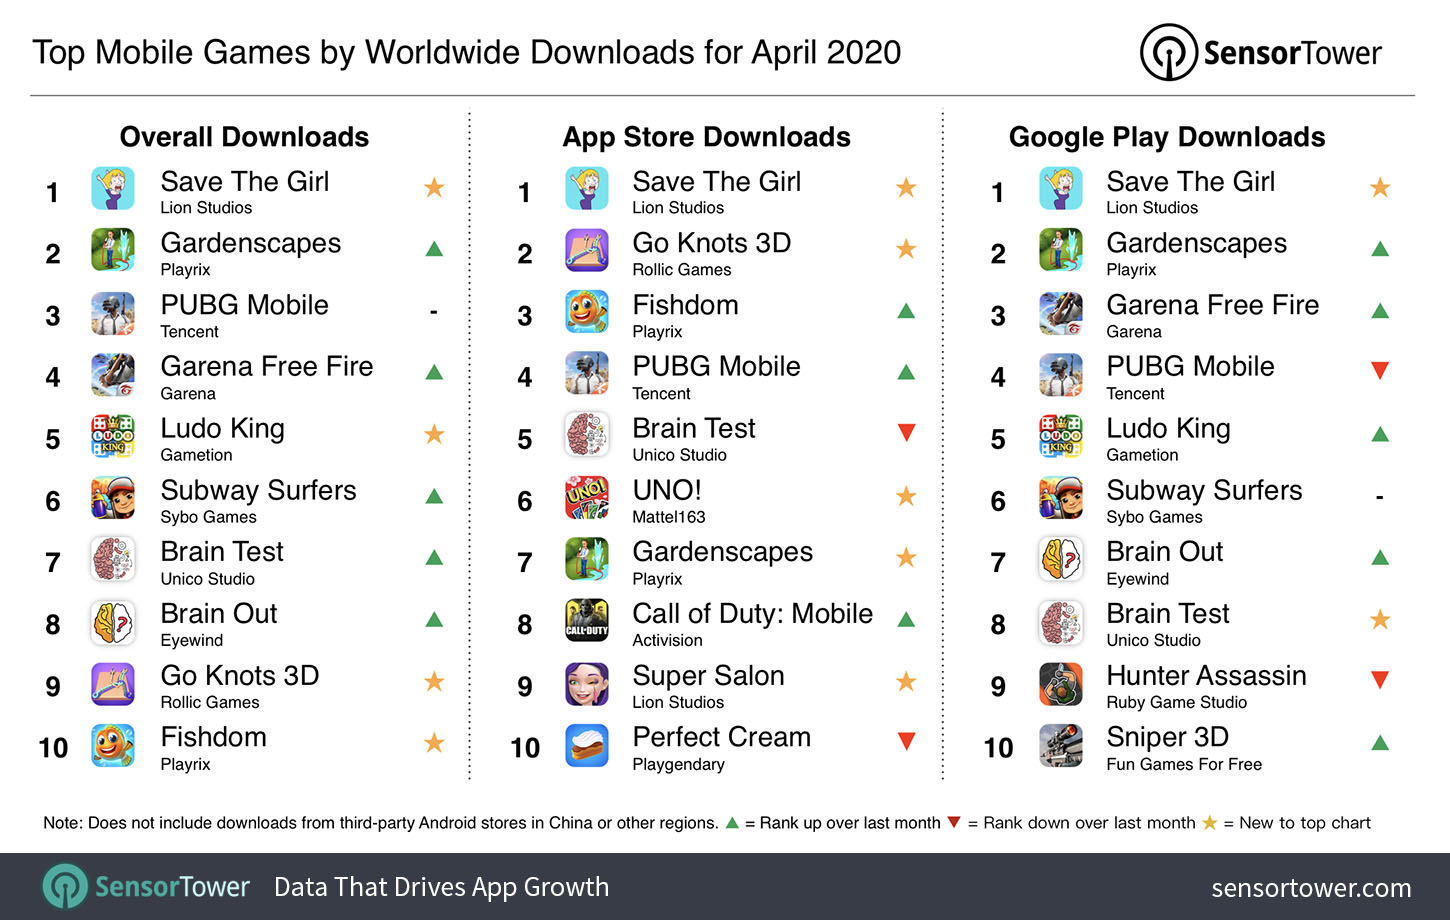 Top Mobile Games Worldwide for April 2020 by Downloads